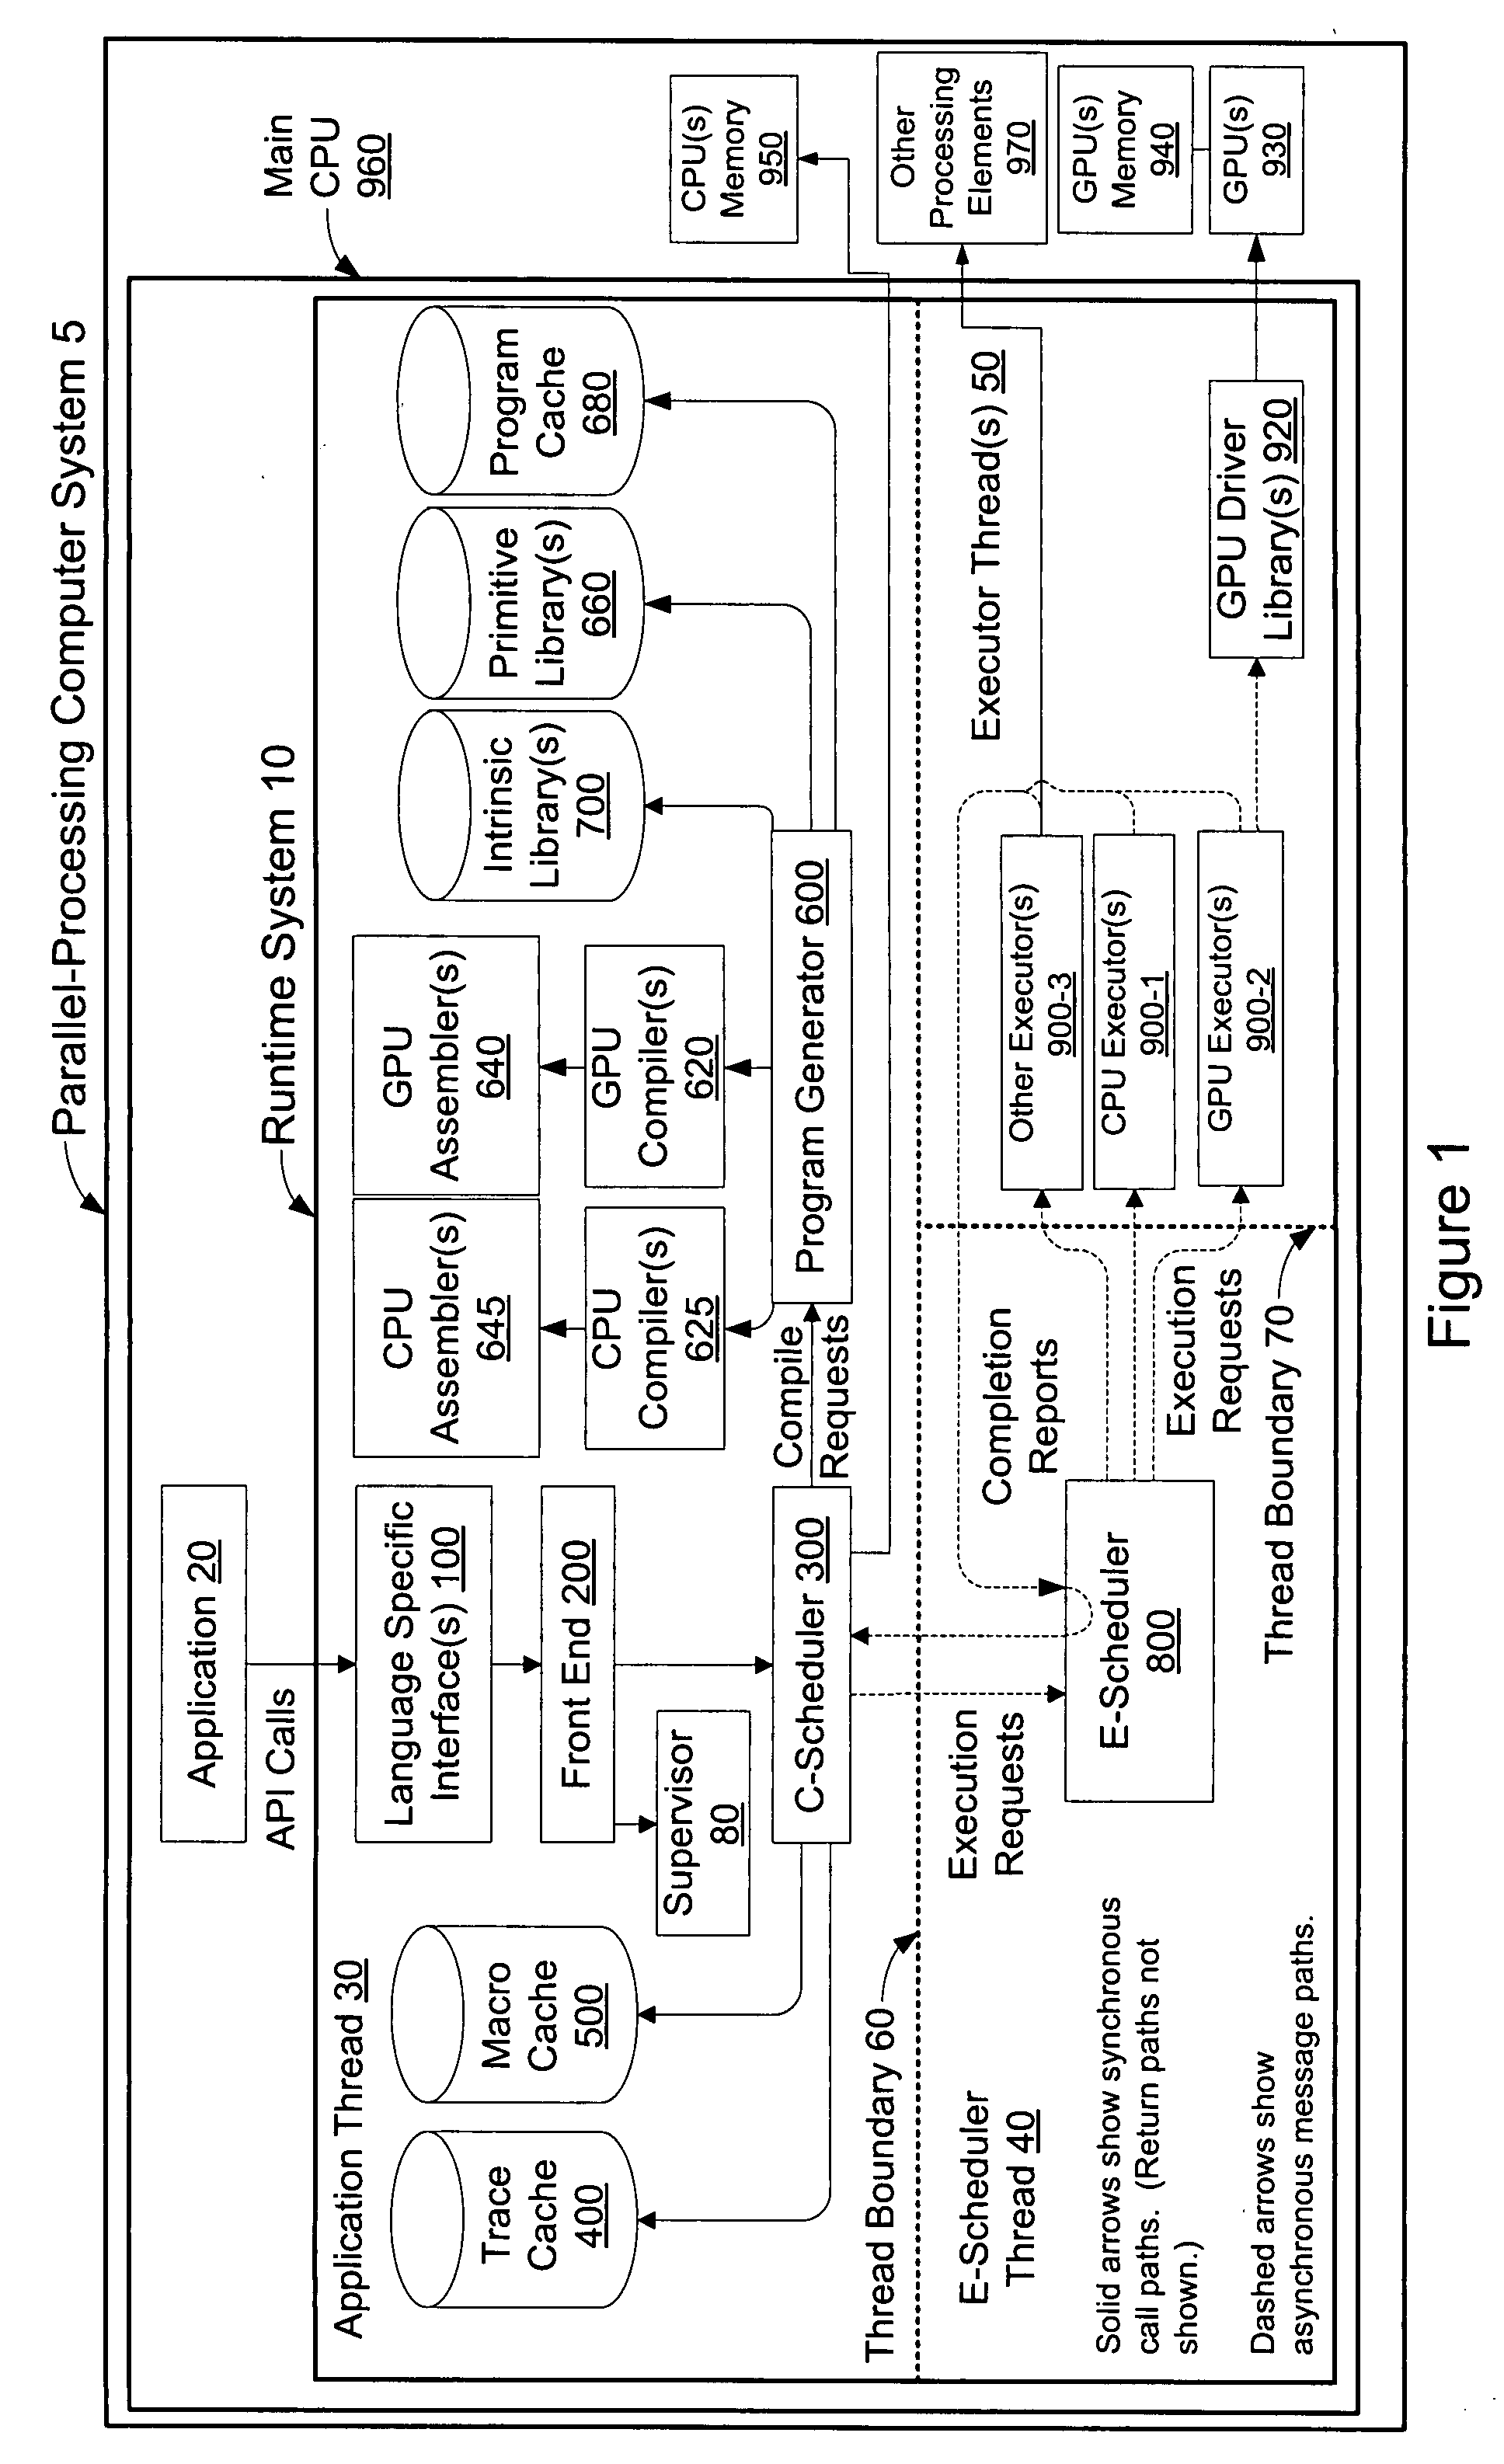 Application program interface of a parallel-processing computer system that supports multiple programming languages